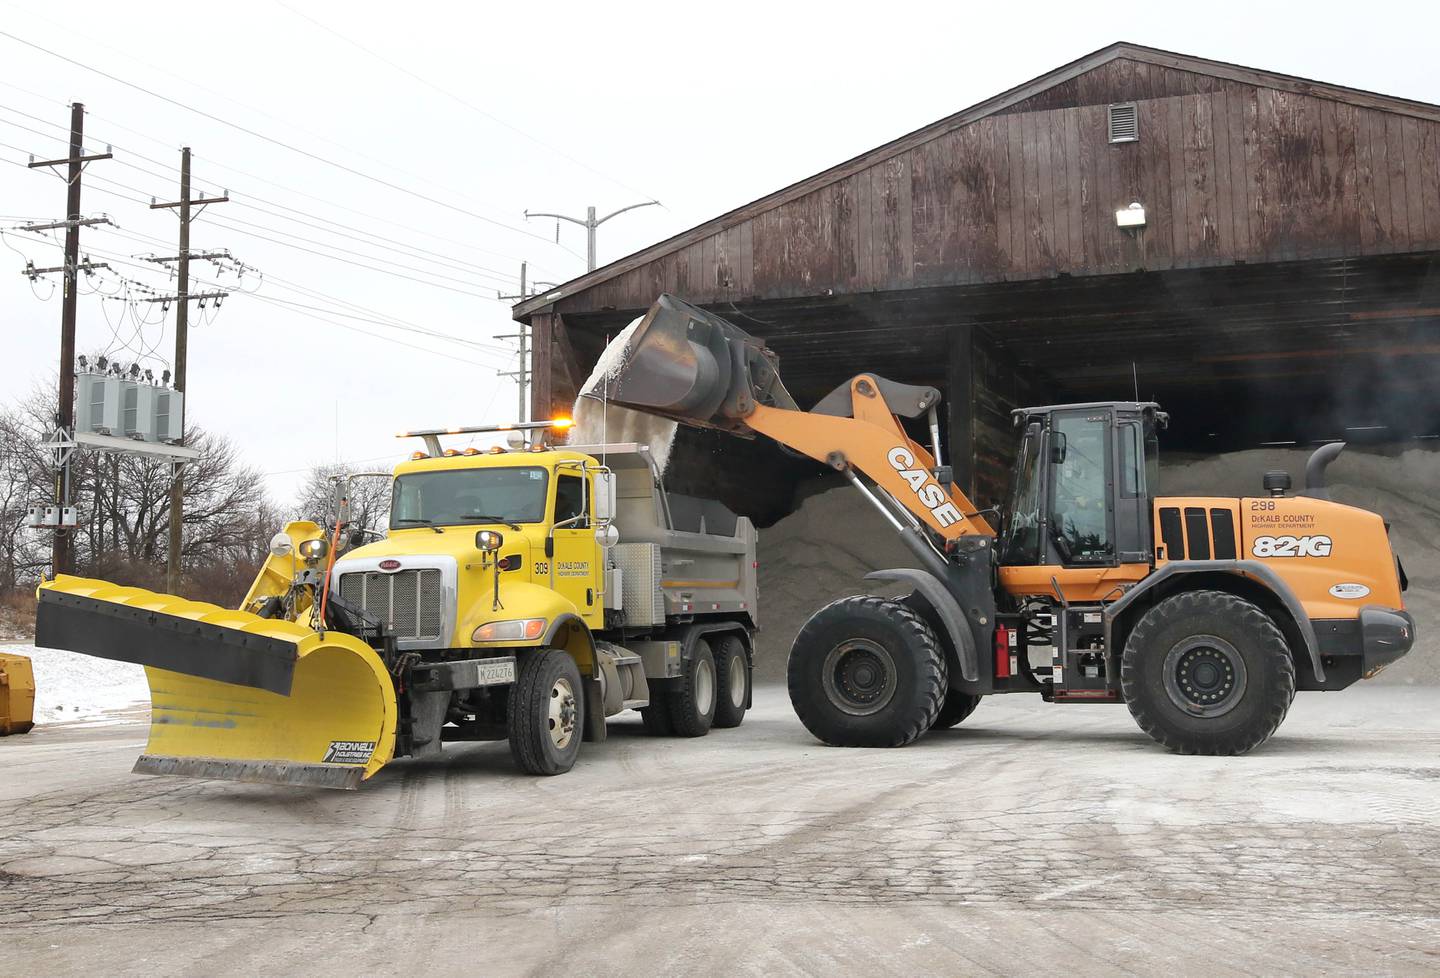 A loader pours salt into a snowplow Tuesday, Dec. 20, 2022, at the DeKalb County Highway Department location in DeKalb. A significant winter storm is expected Thursday and Friday that will blanket the area with several inches of snow.